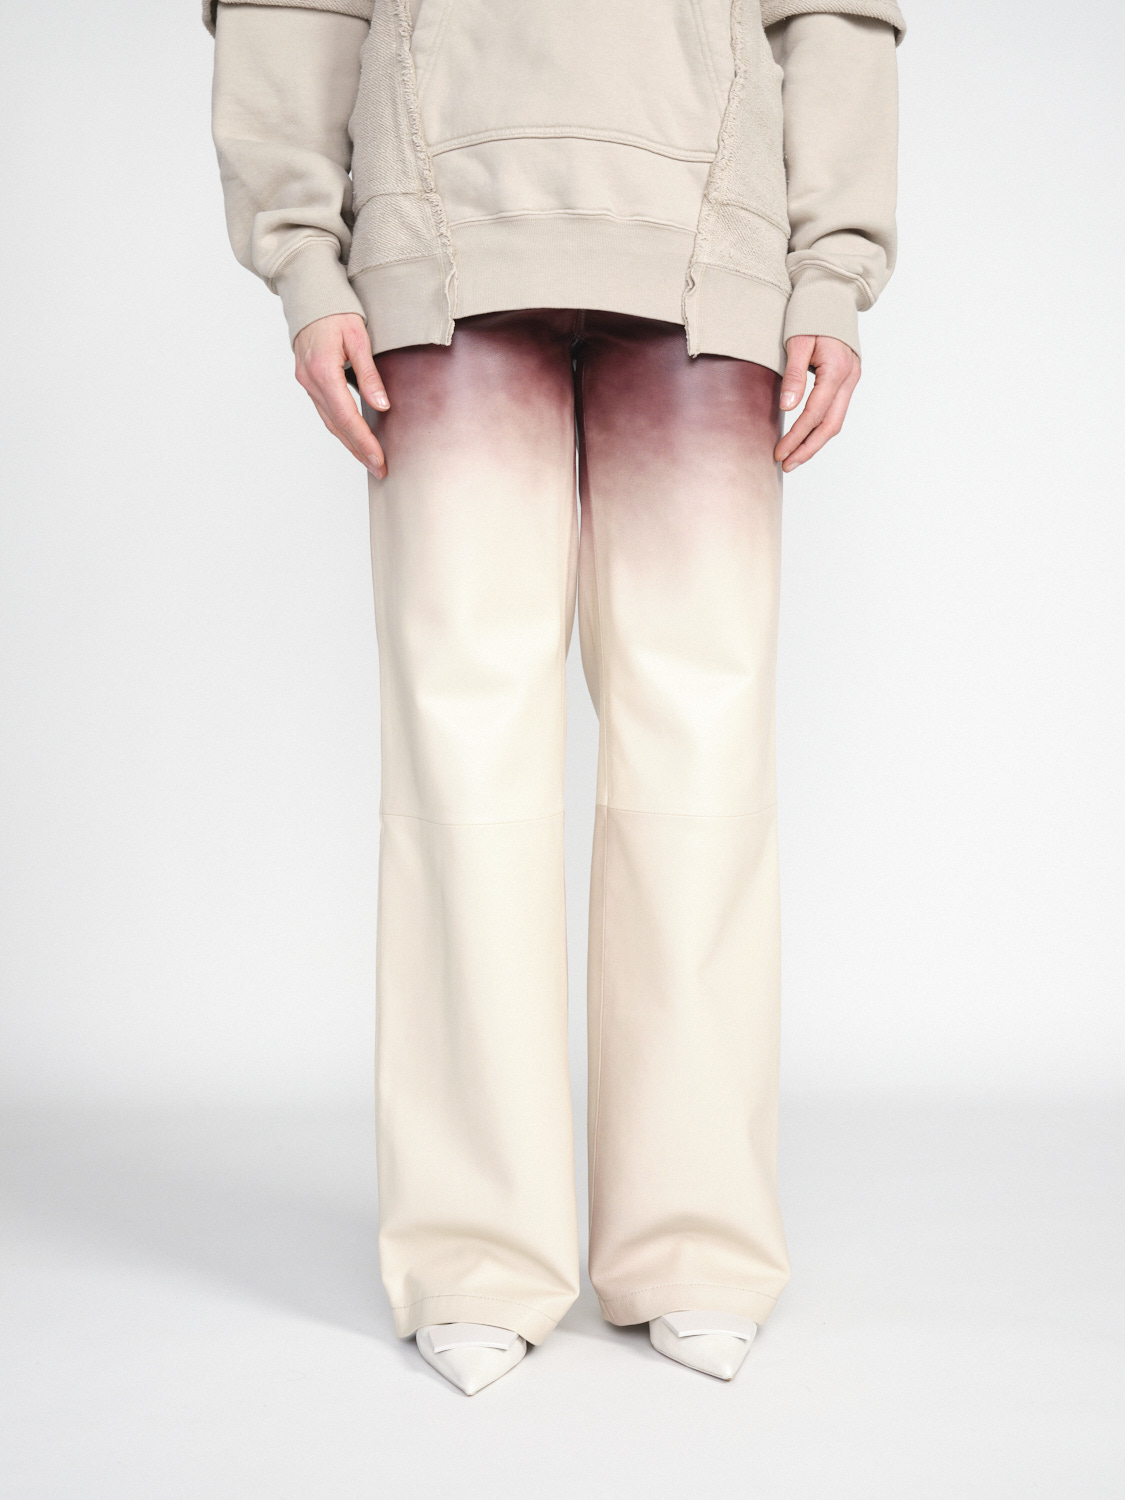 Arma Galizia – leather trousers with degradé effect  brown 34